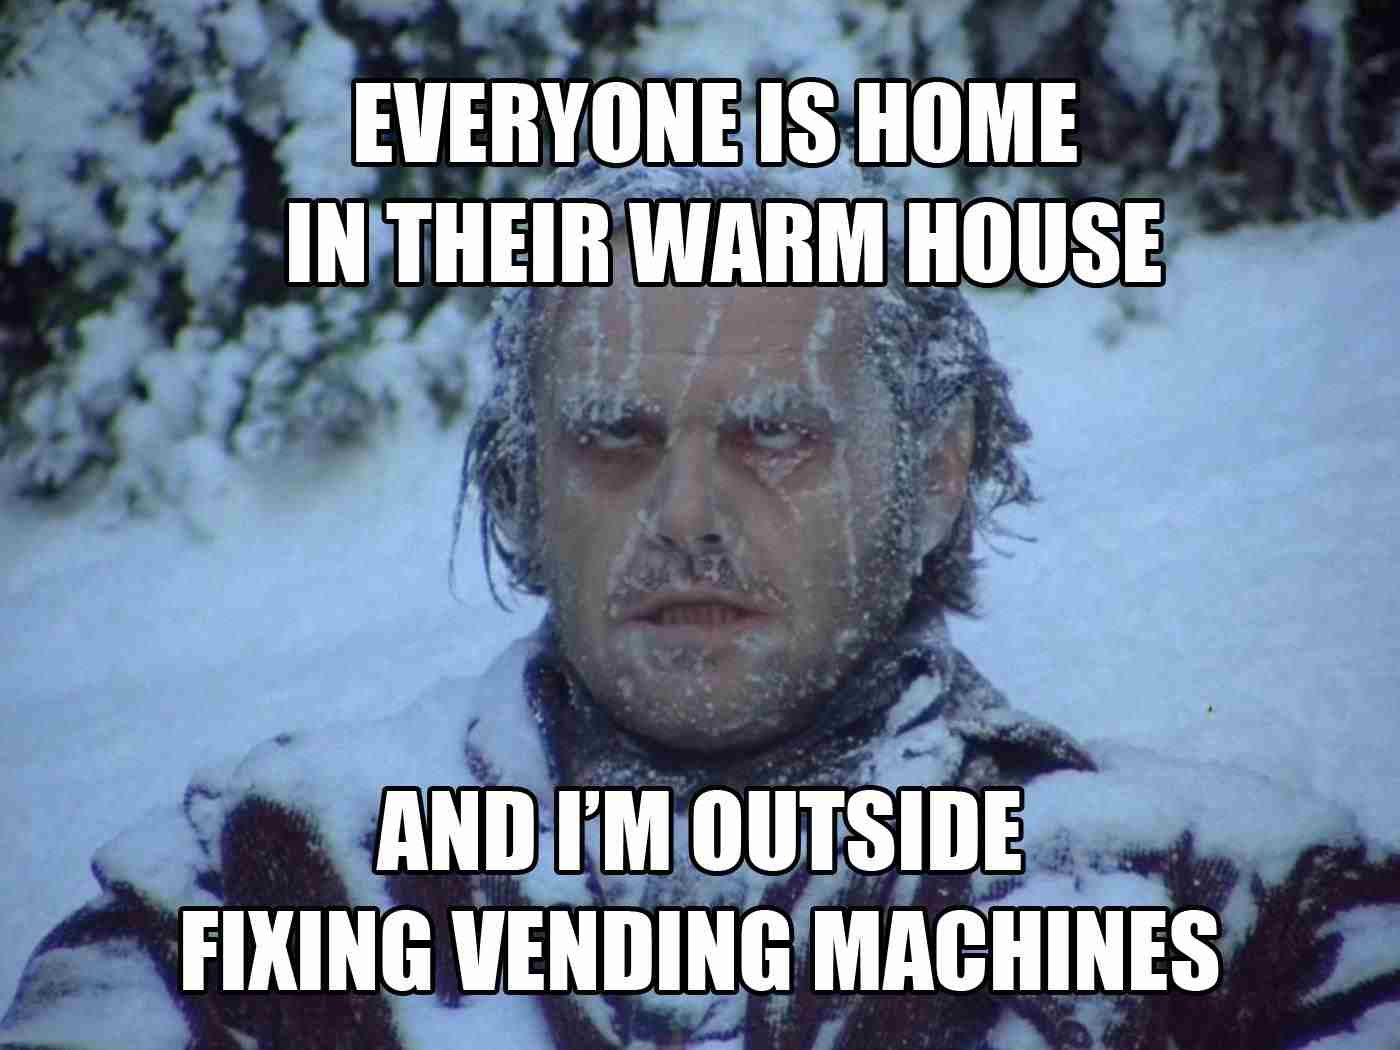 https://sayingimages.com/wp-content/uploads/everyone-is-home-in-thier-warm-house-work-sucks-meme.jpg